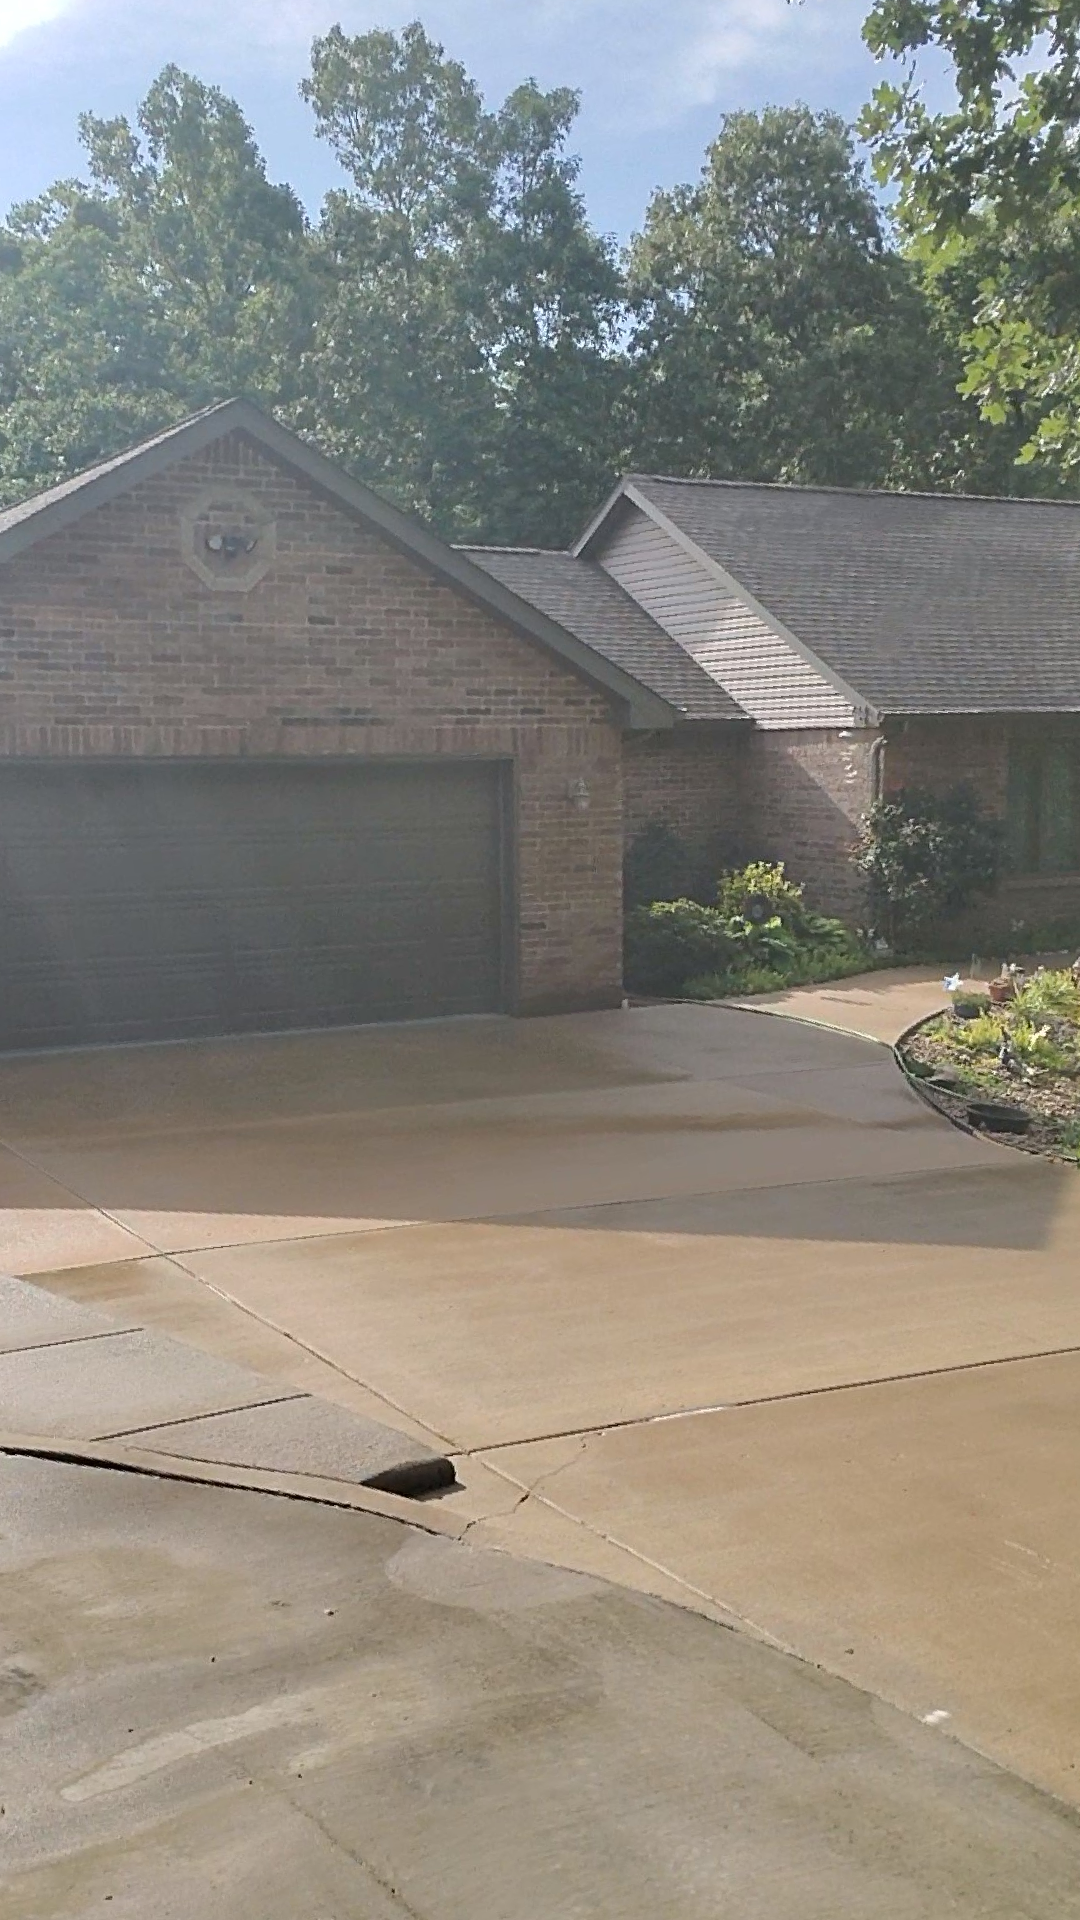 A brick house with two garage doors and a driveway in front of it.